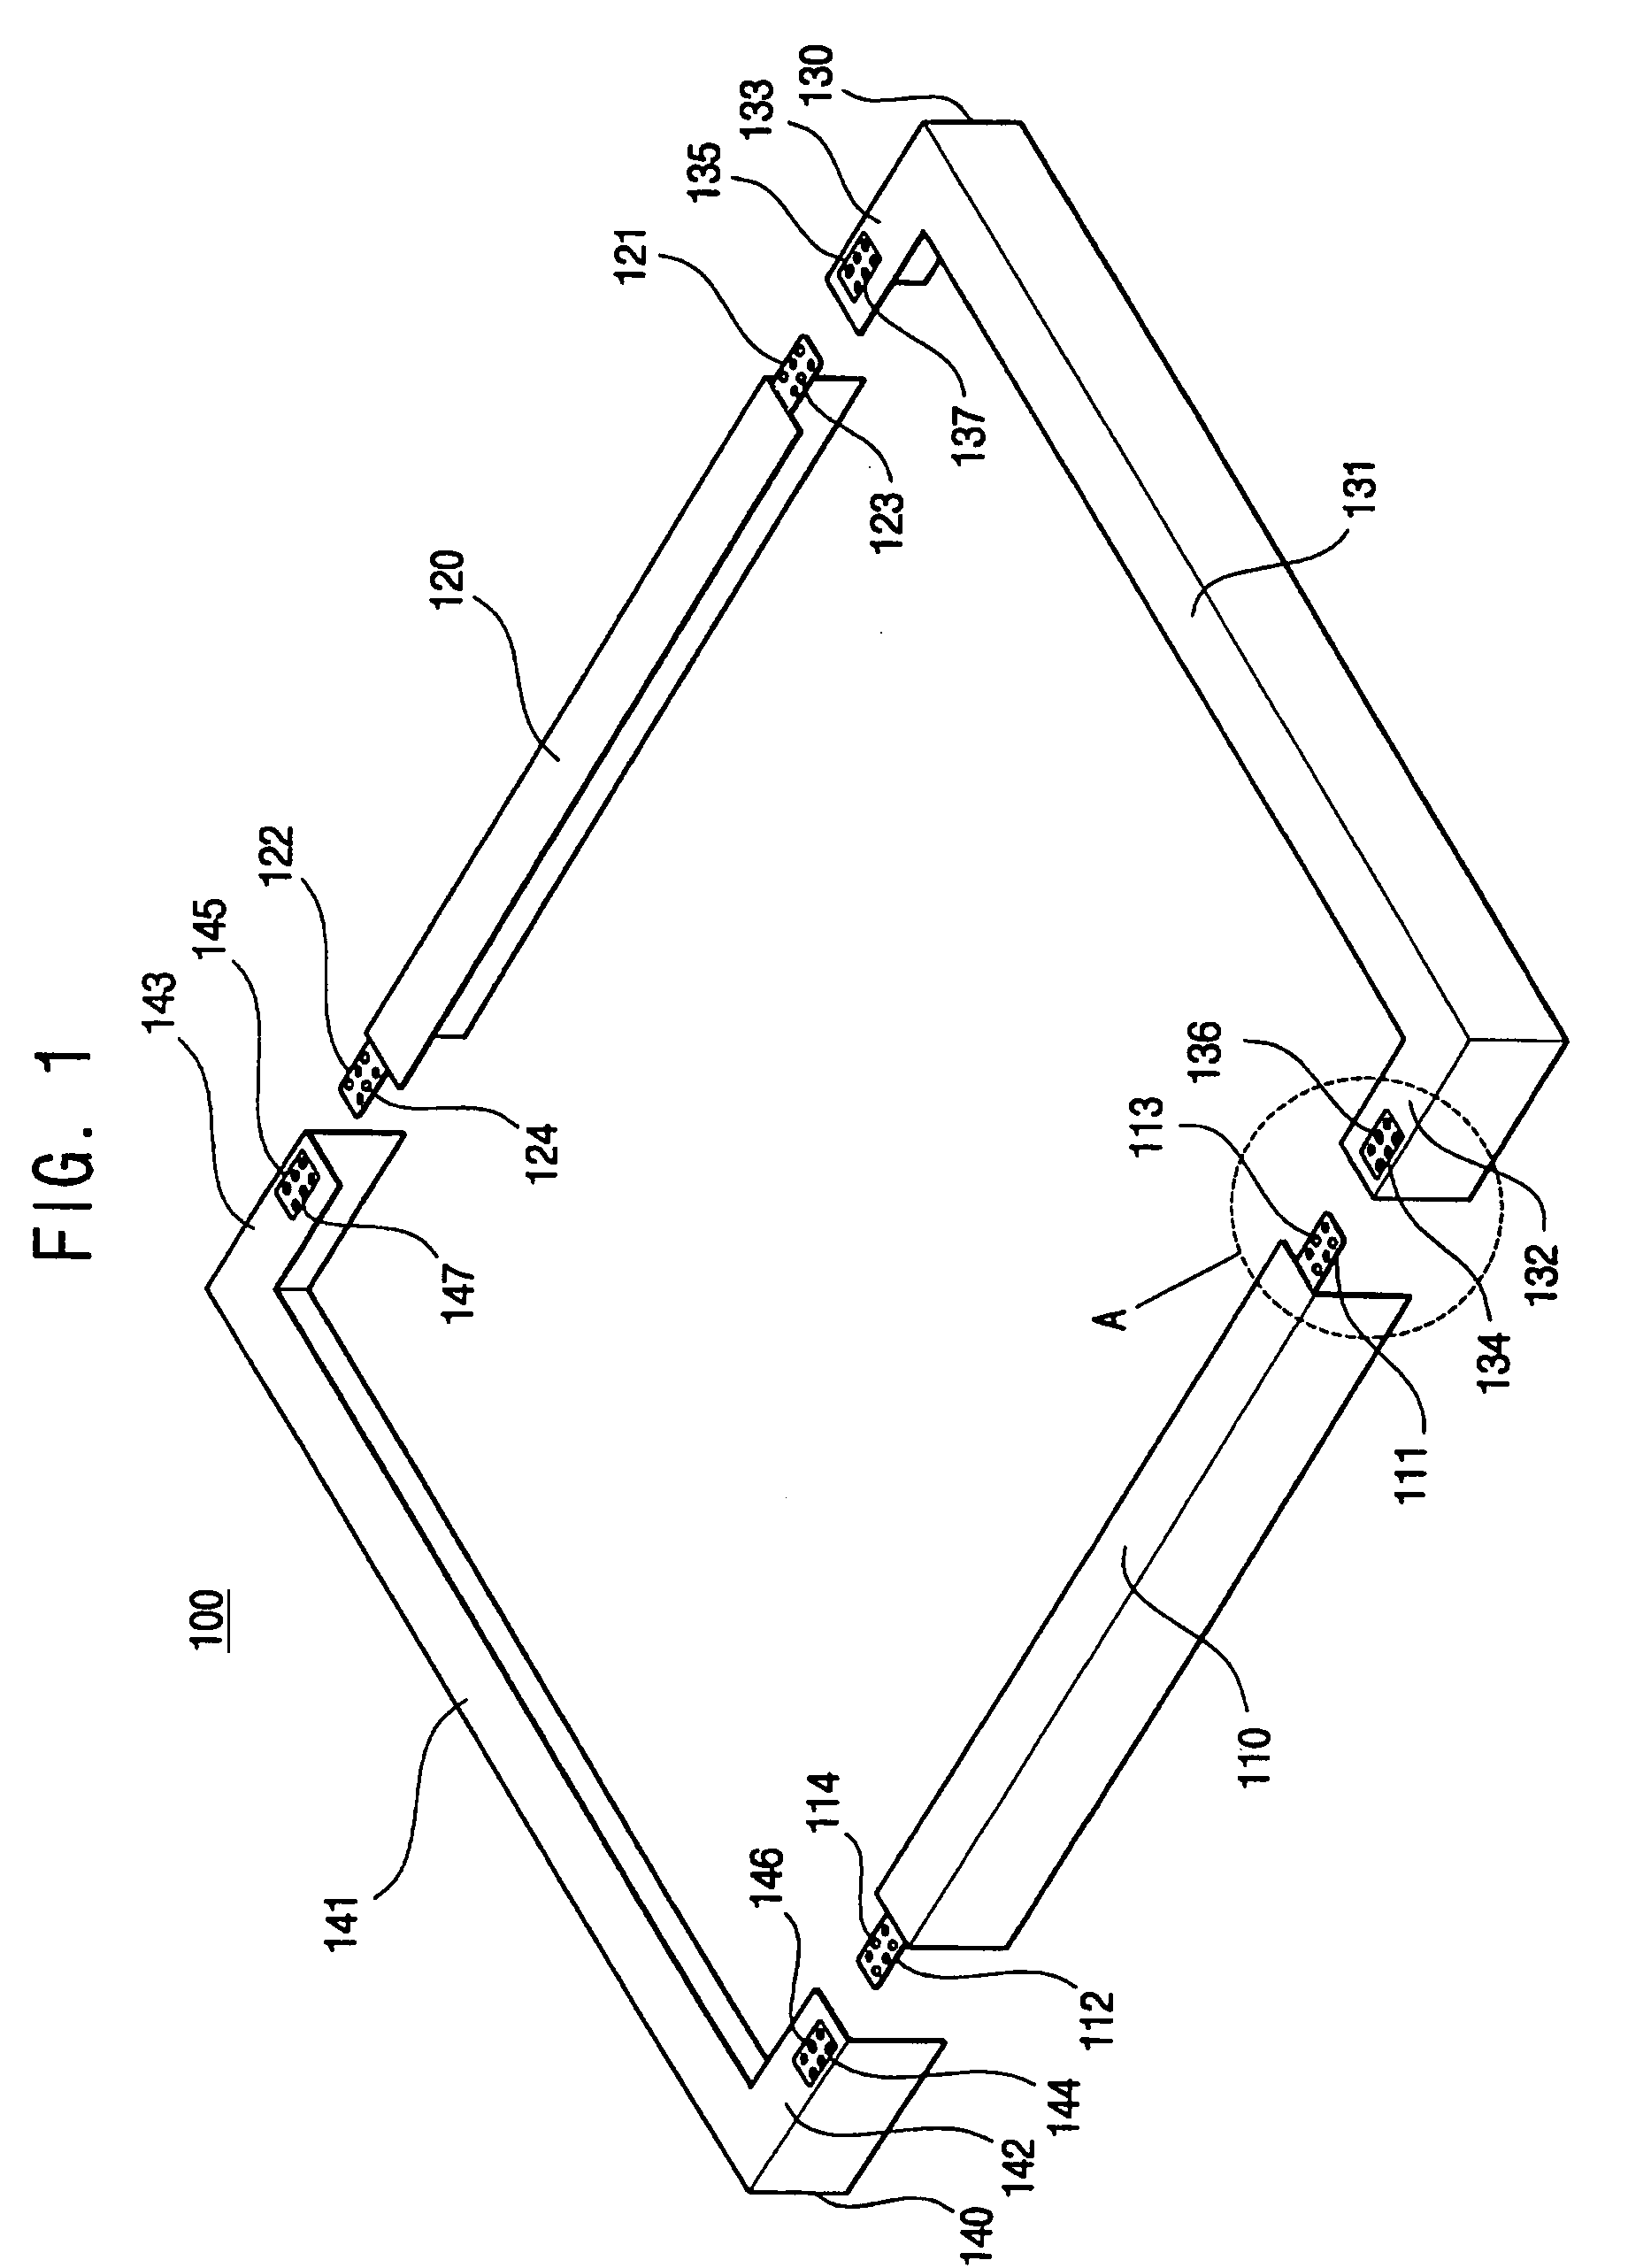 Chassis and display device having the same